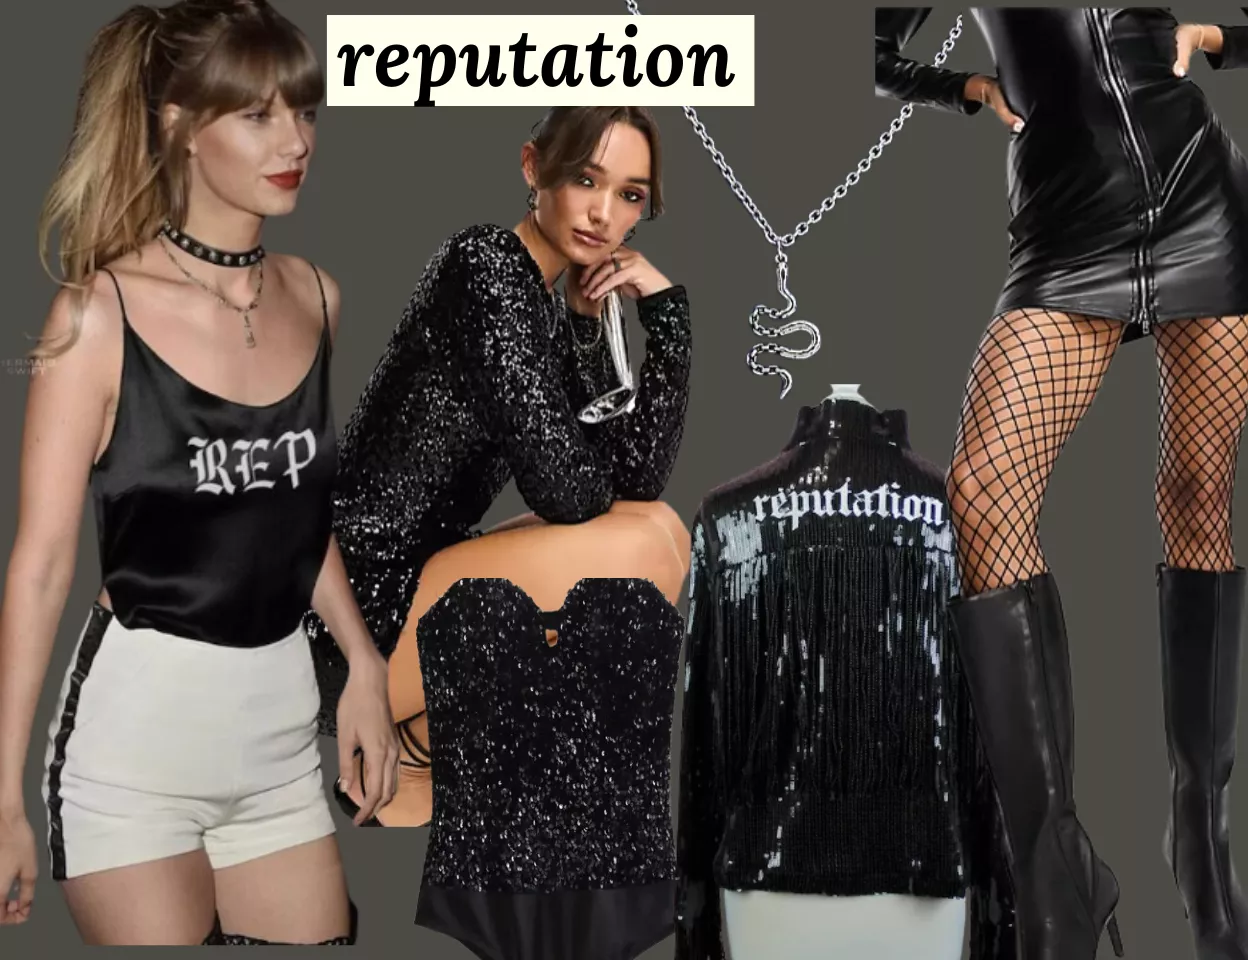 Reputation outfit ideas